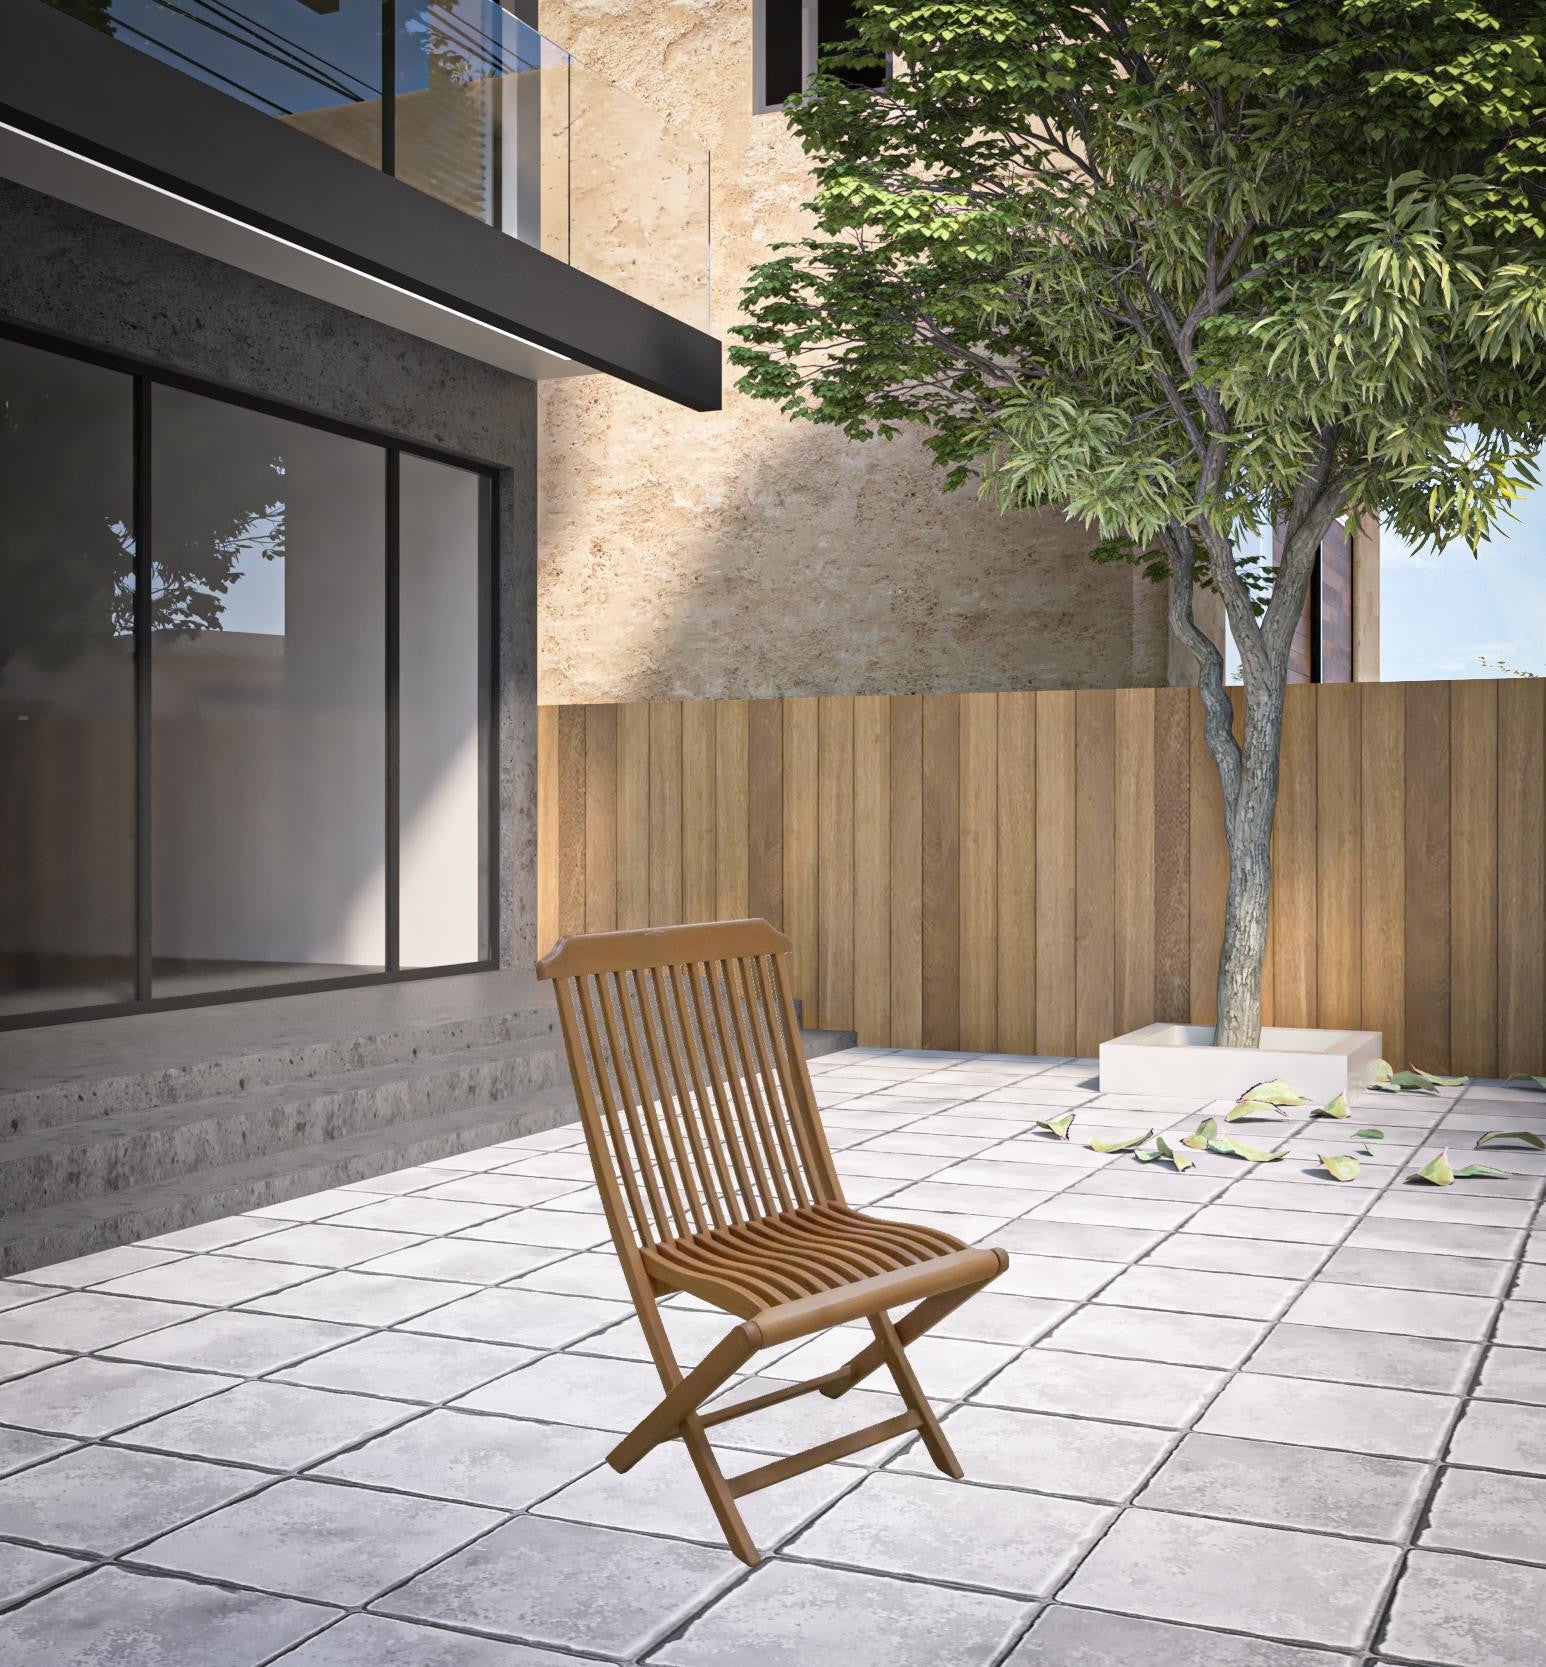 Brown Solid Wood Deck Chair - Tuesday Morning-Outdoor Chairs